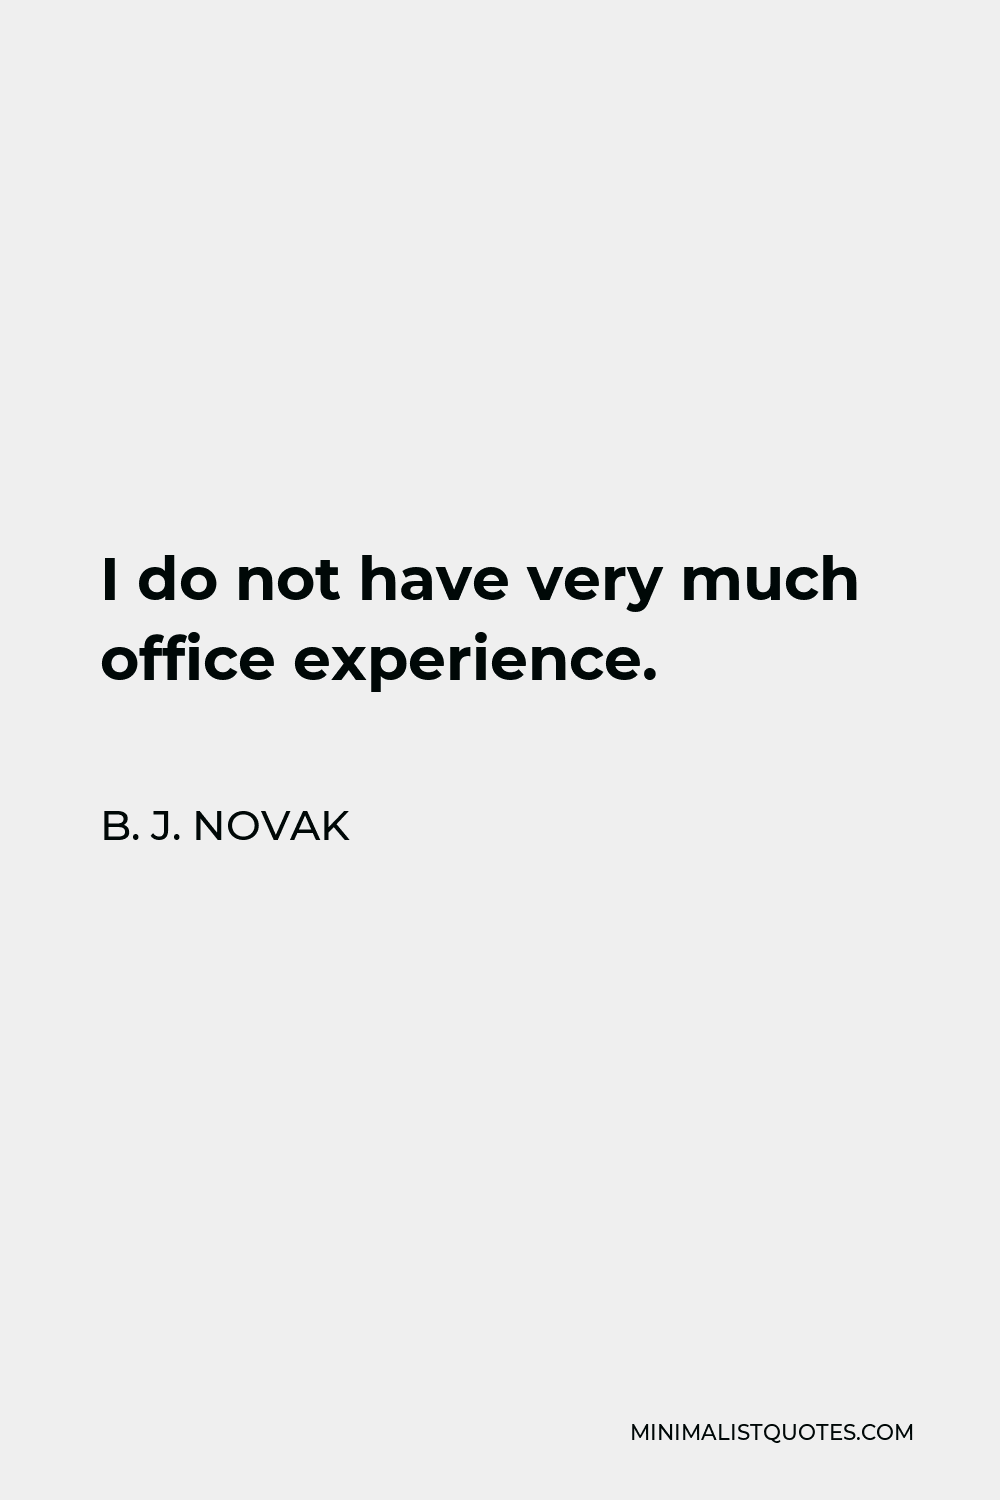 B. J. Novak Quote - I do not have very much office experience.